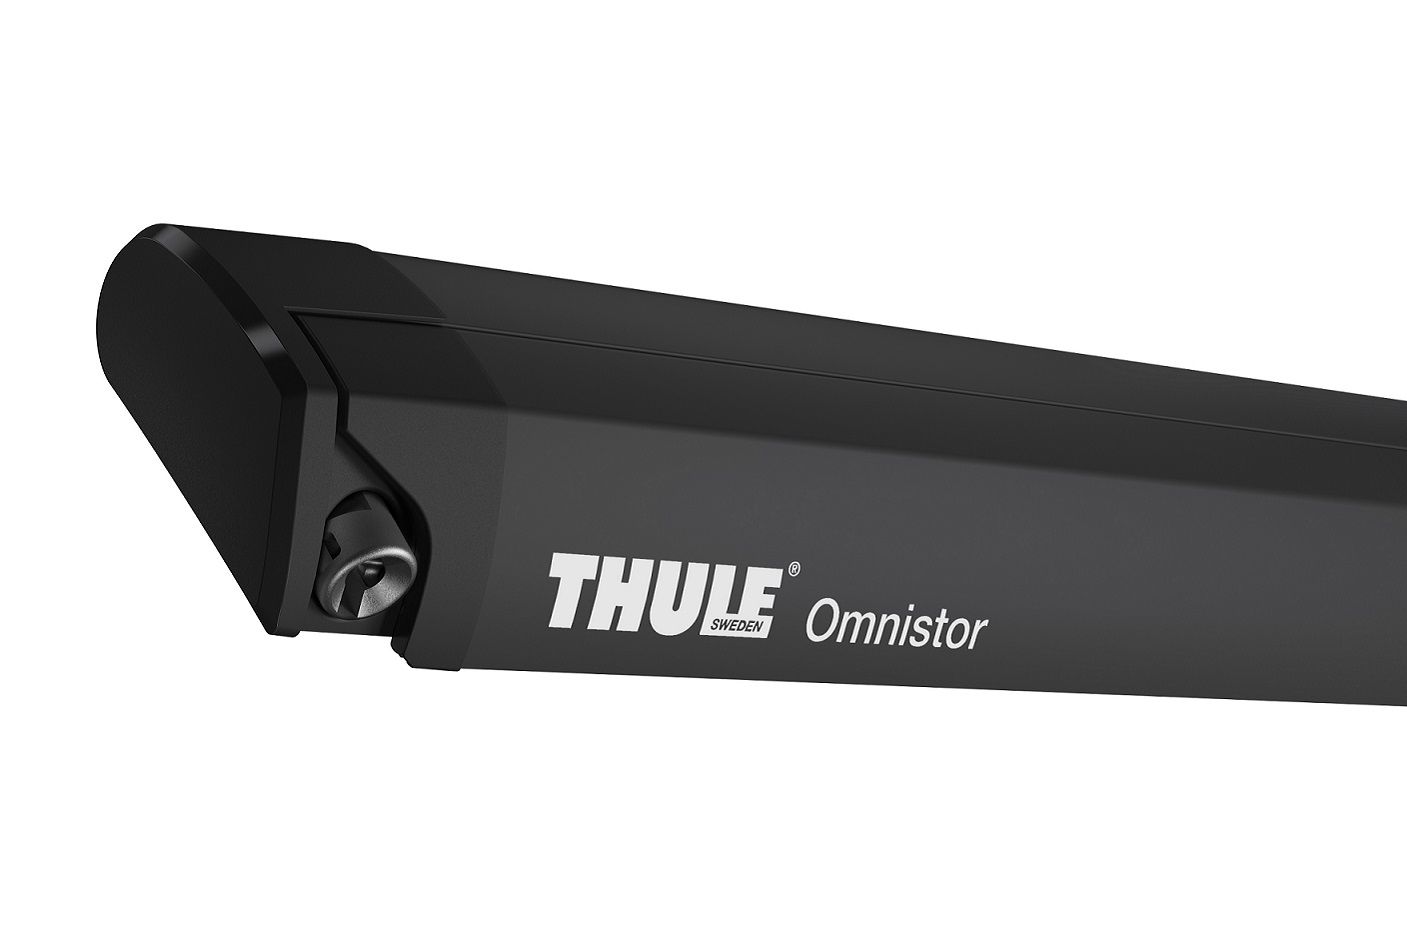 Awning Thule Omnistor 6200